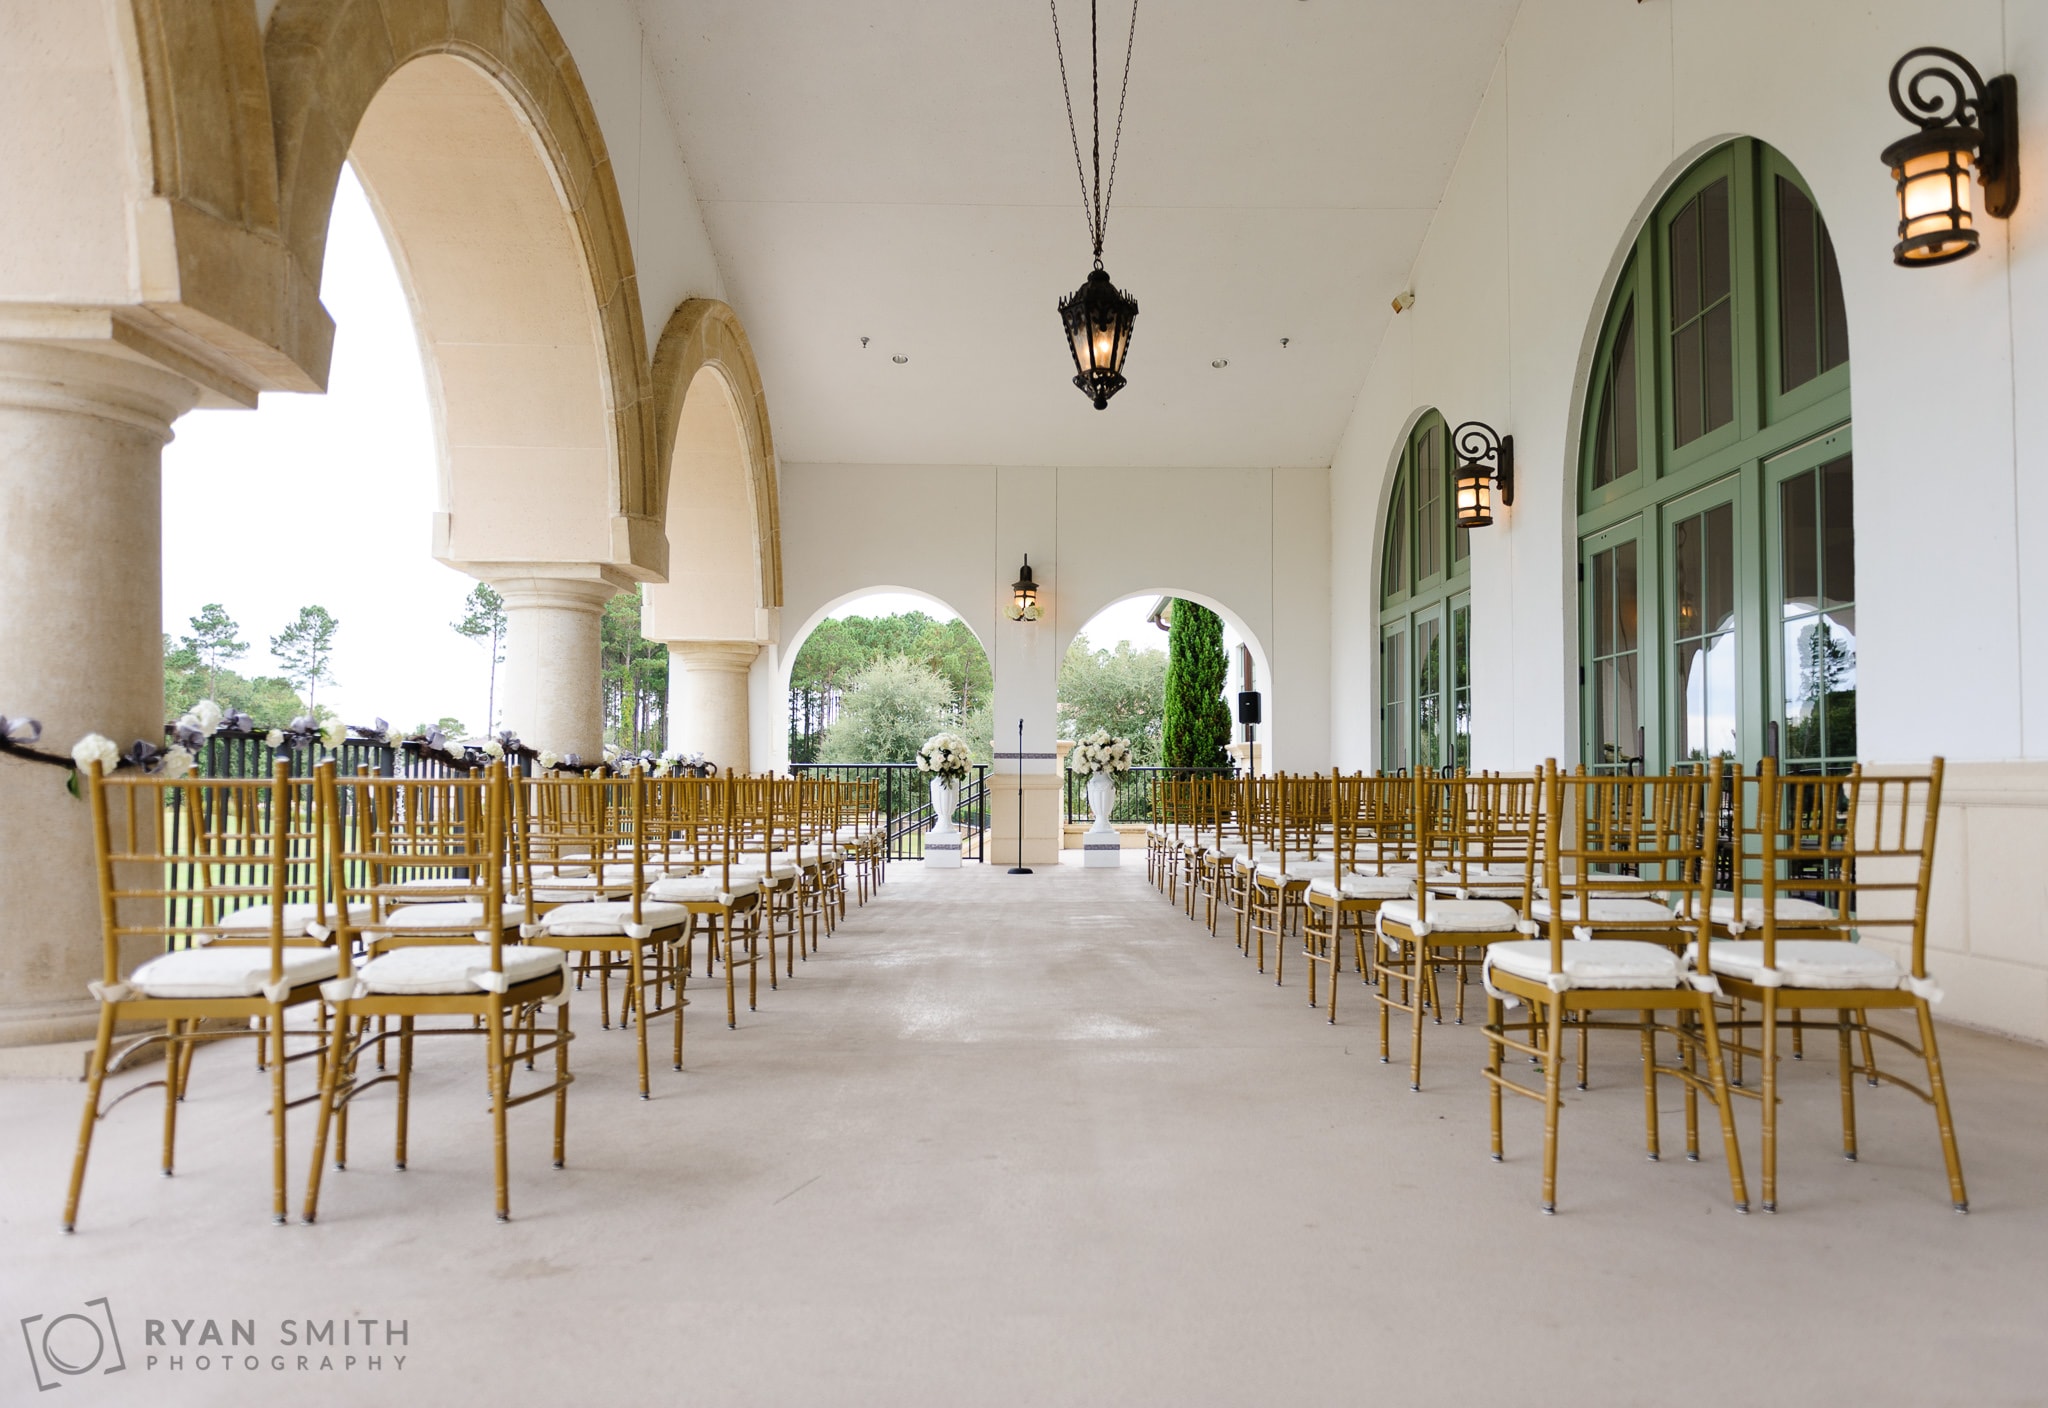 Chairs setup for wedding ceremony - Members Club at Grande Dunes